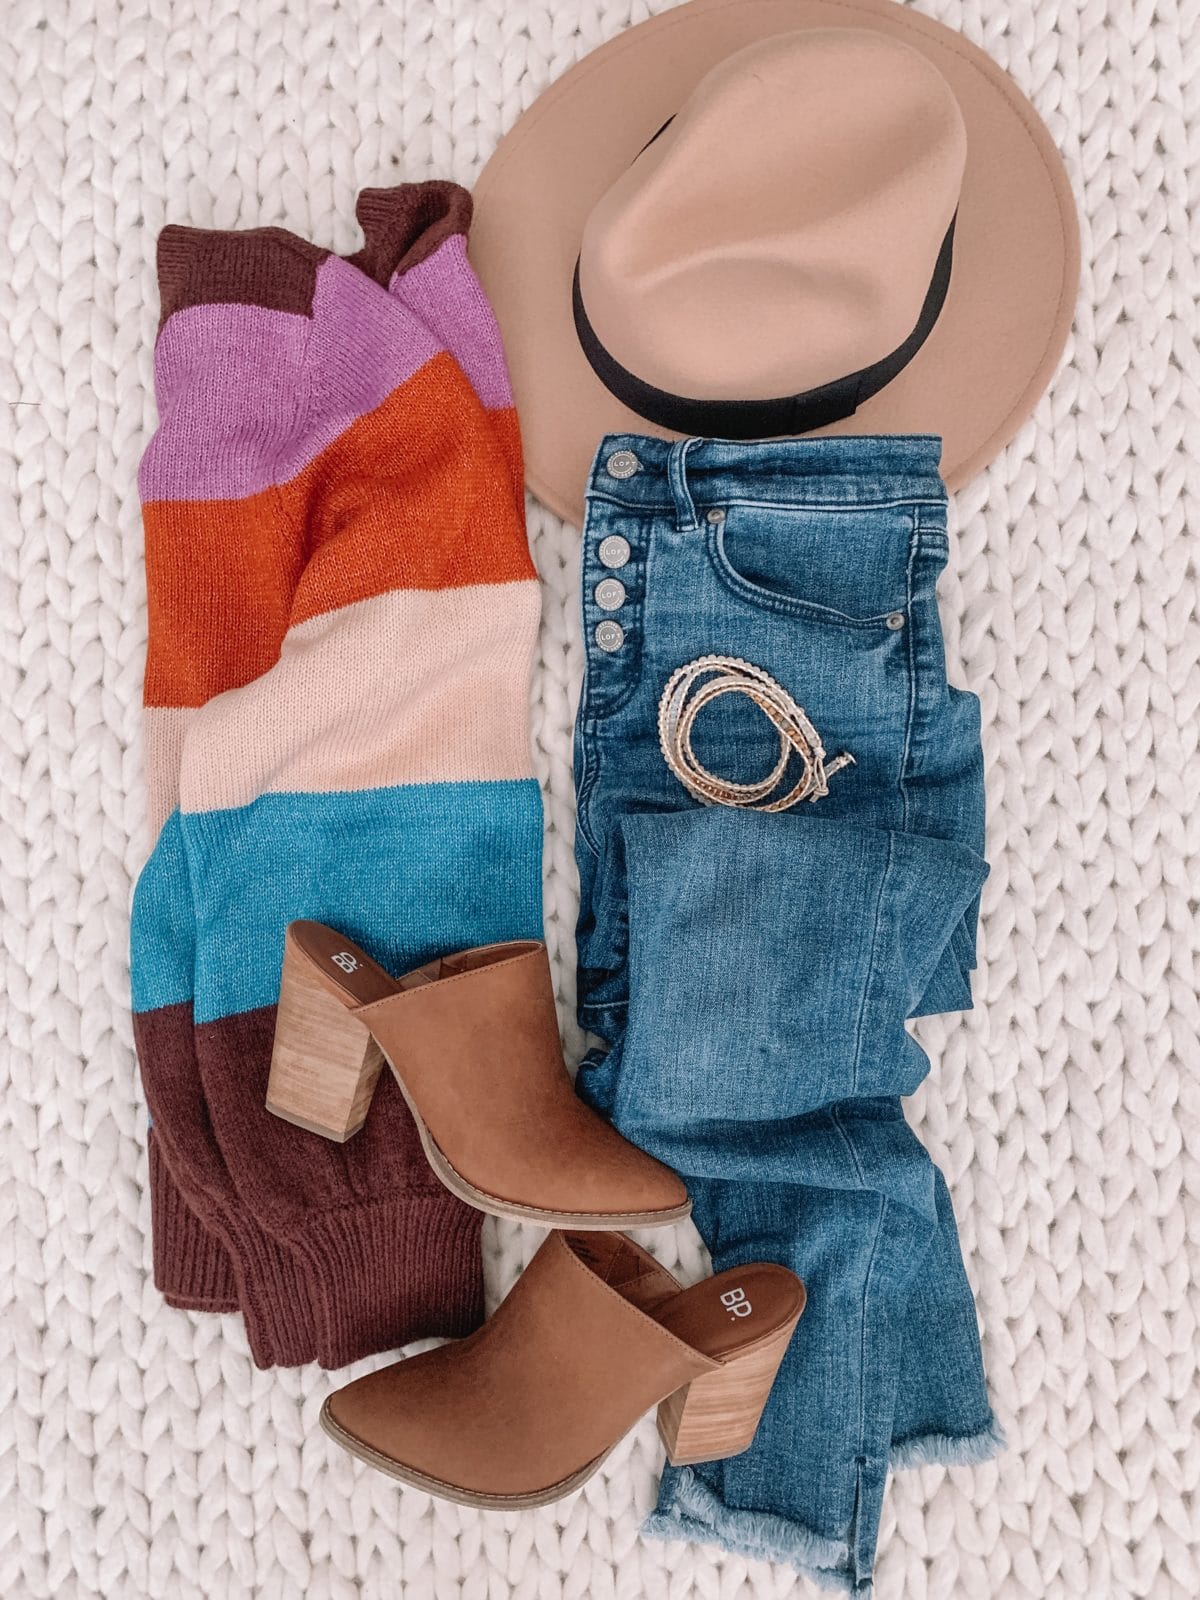 Sweater, Jeans, Mules, Amazon Hat